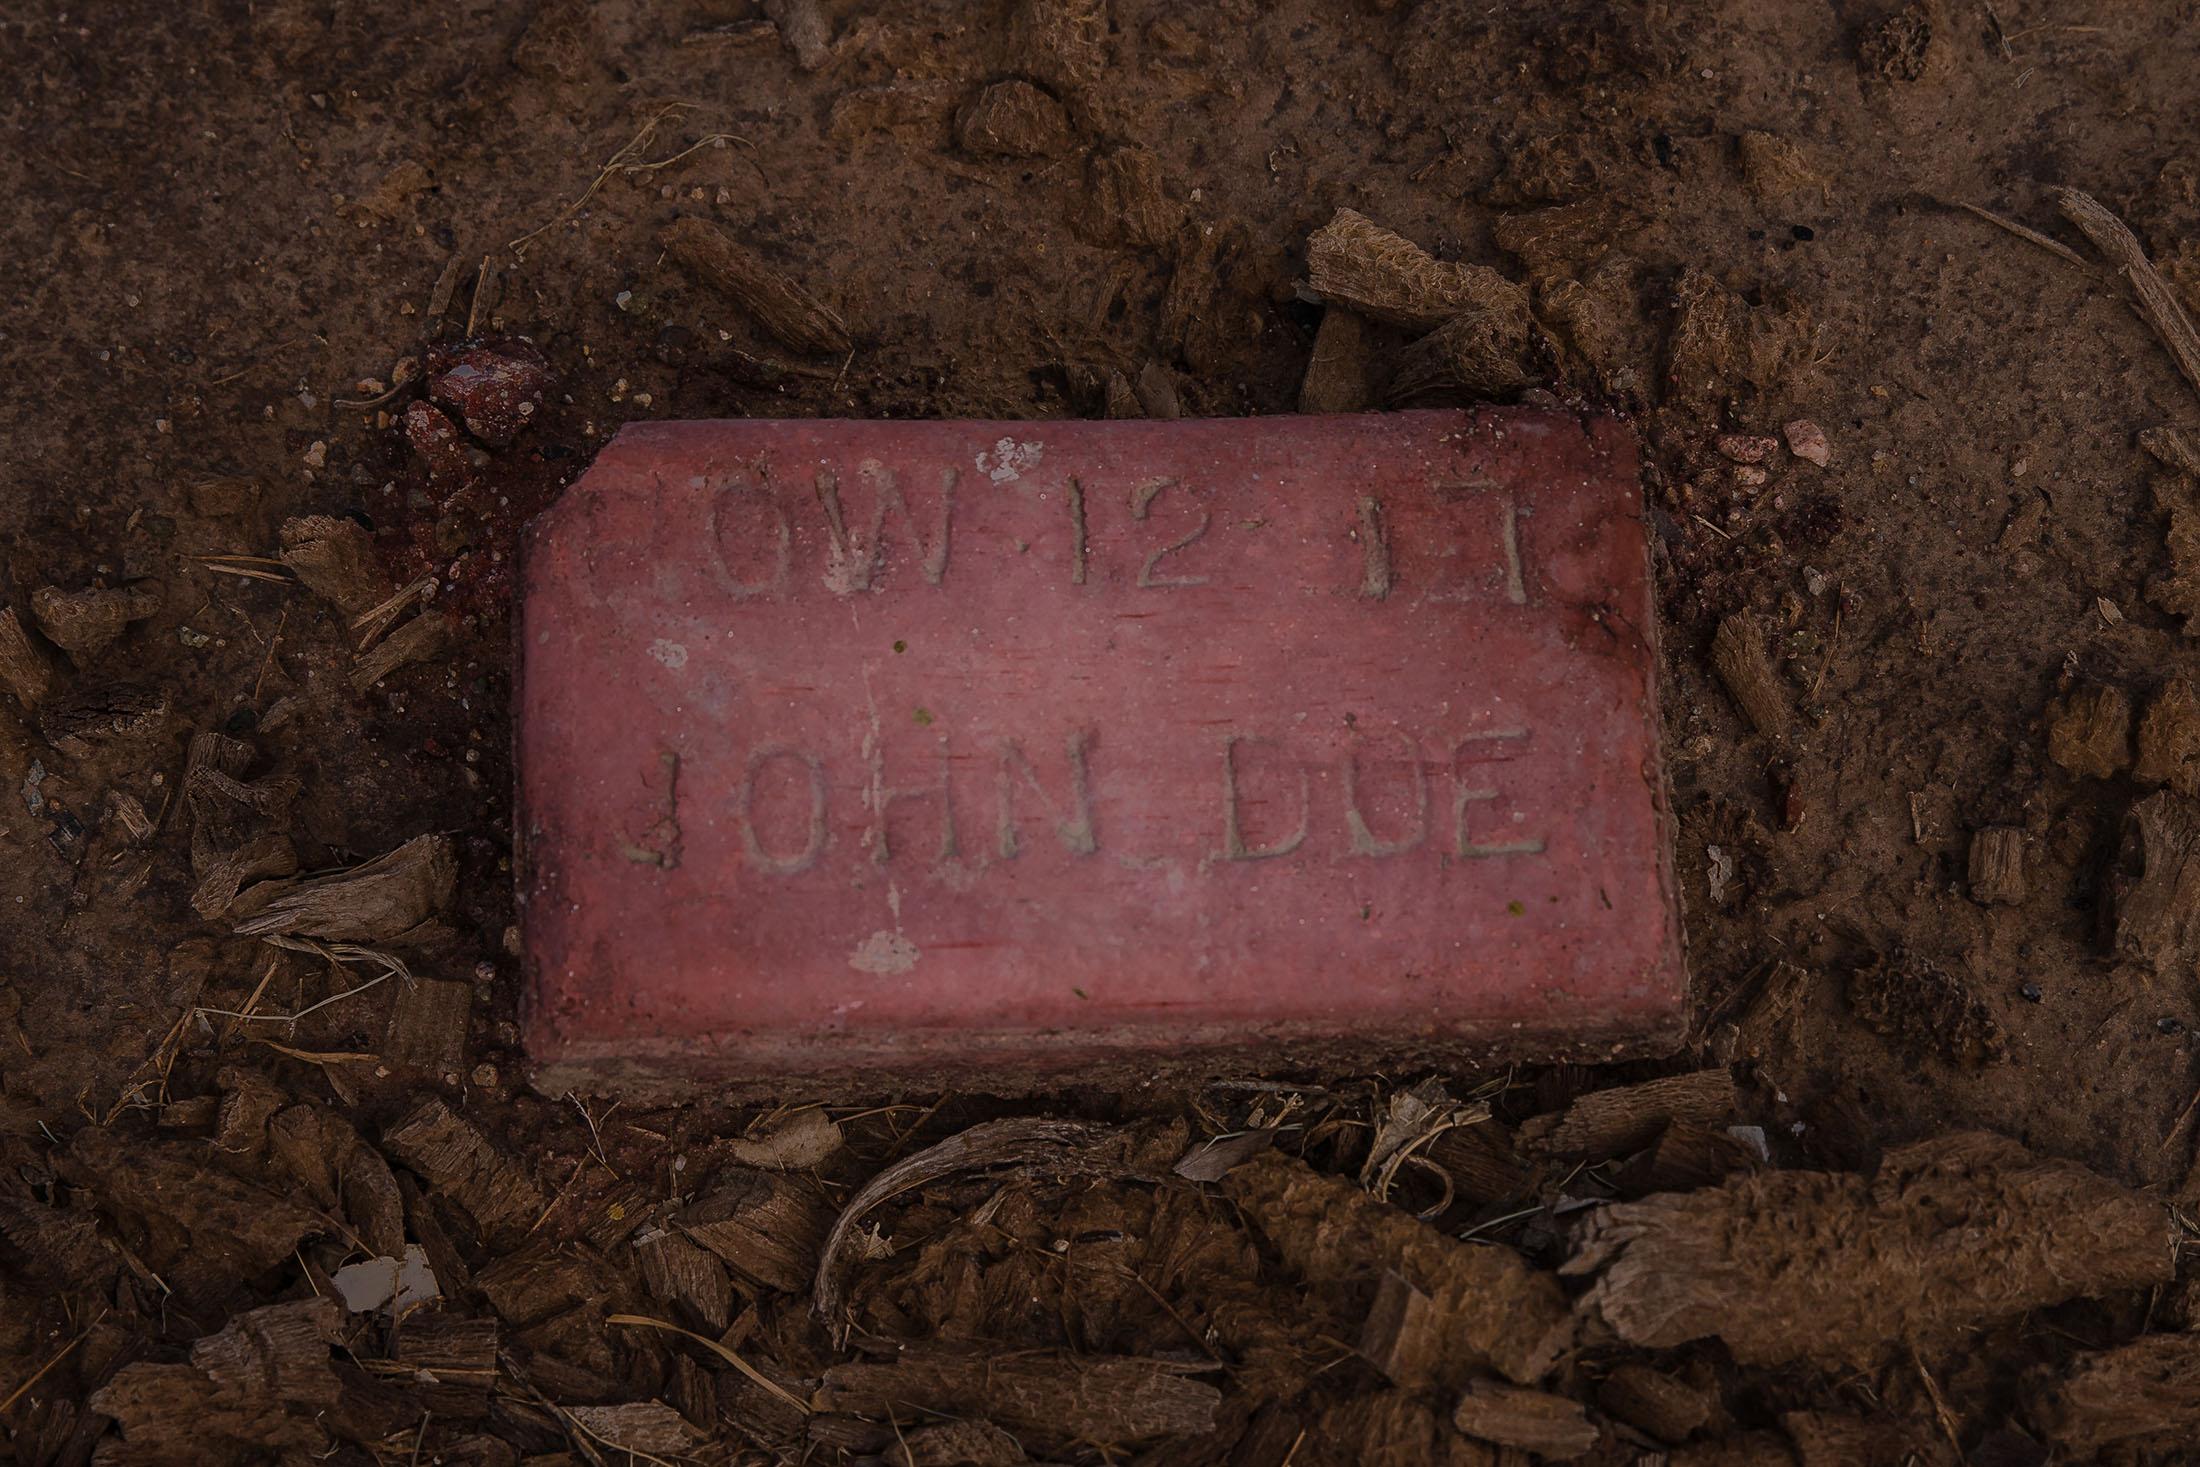 A &quot;John Doe&quot; buried at the end of Terrace Park Cemetery in Holtville, California on March 10, 2021. Undocumented immigrants, people who are not identified as well as family members who can&#39;t afford plots are buried in this section of the cemetery. As of last Wednesday 618 people have been buried, 357 are people whose names are known and 261 are John Does.